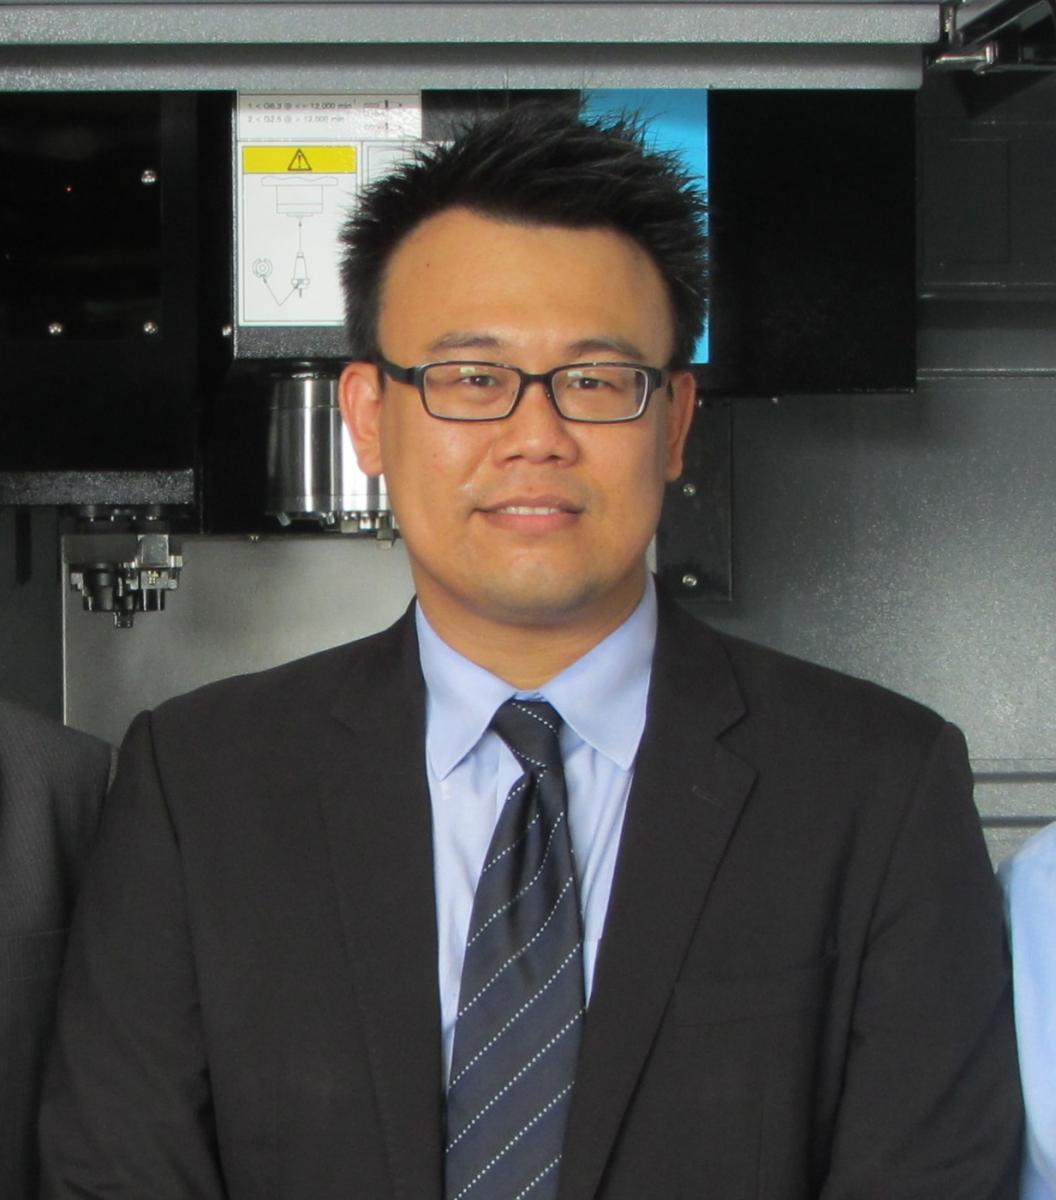 Wai Yip Lee, General Manager of Hurco (S.E. Asia) Pte Ltd